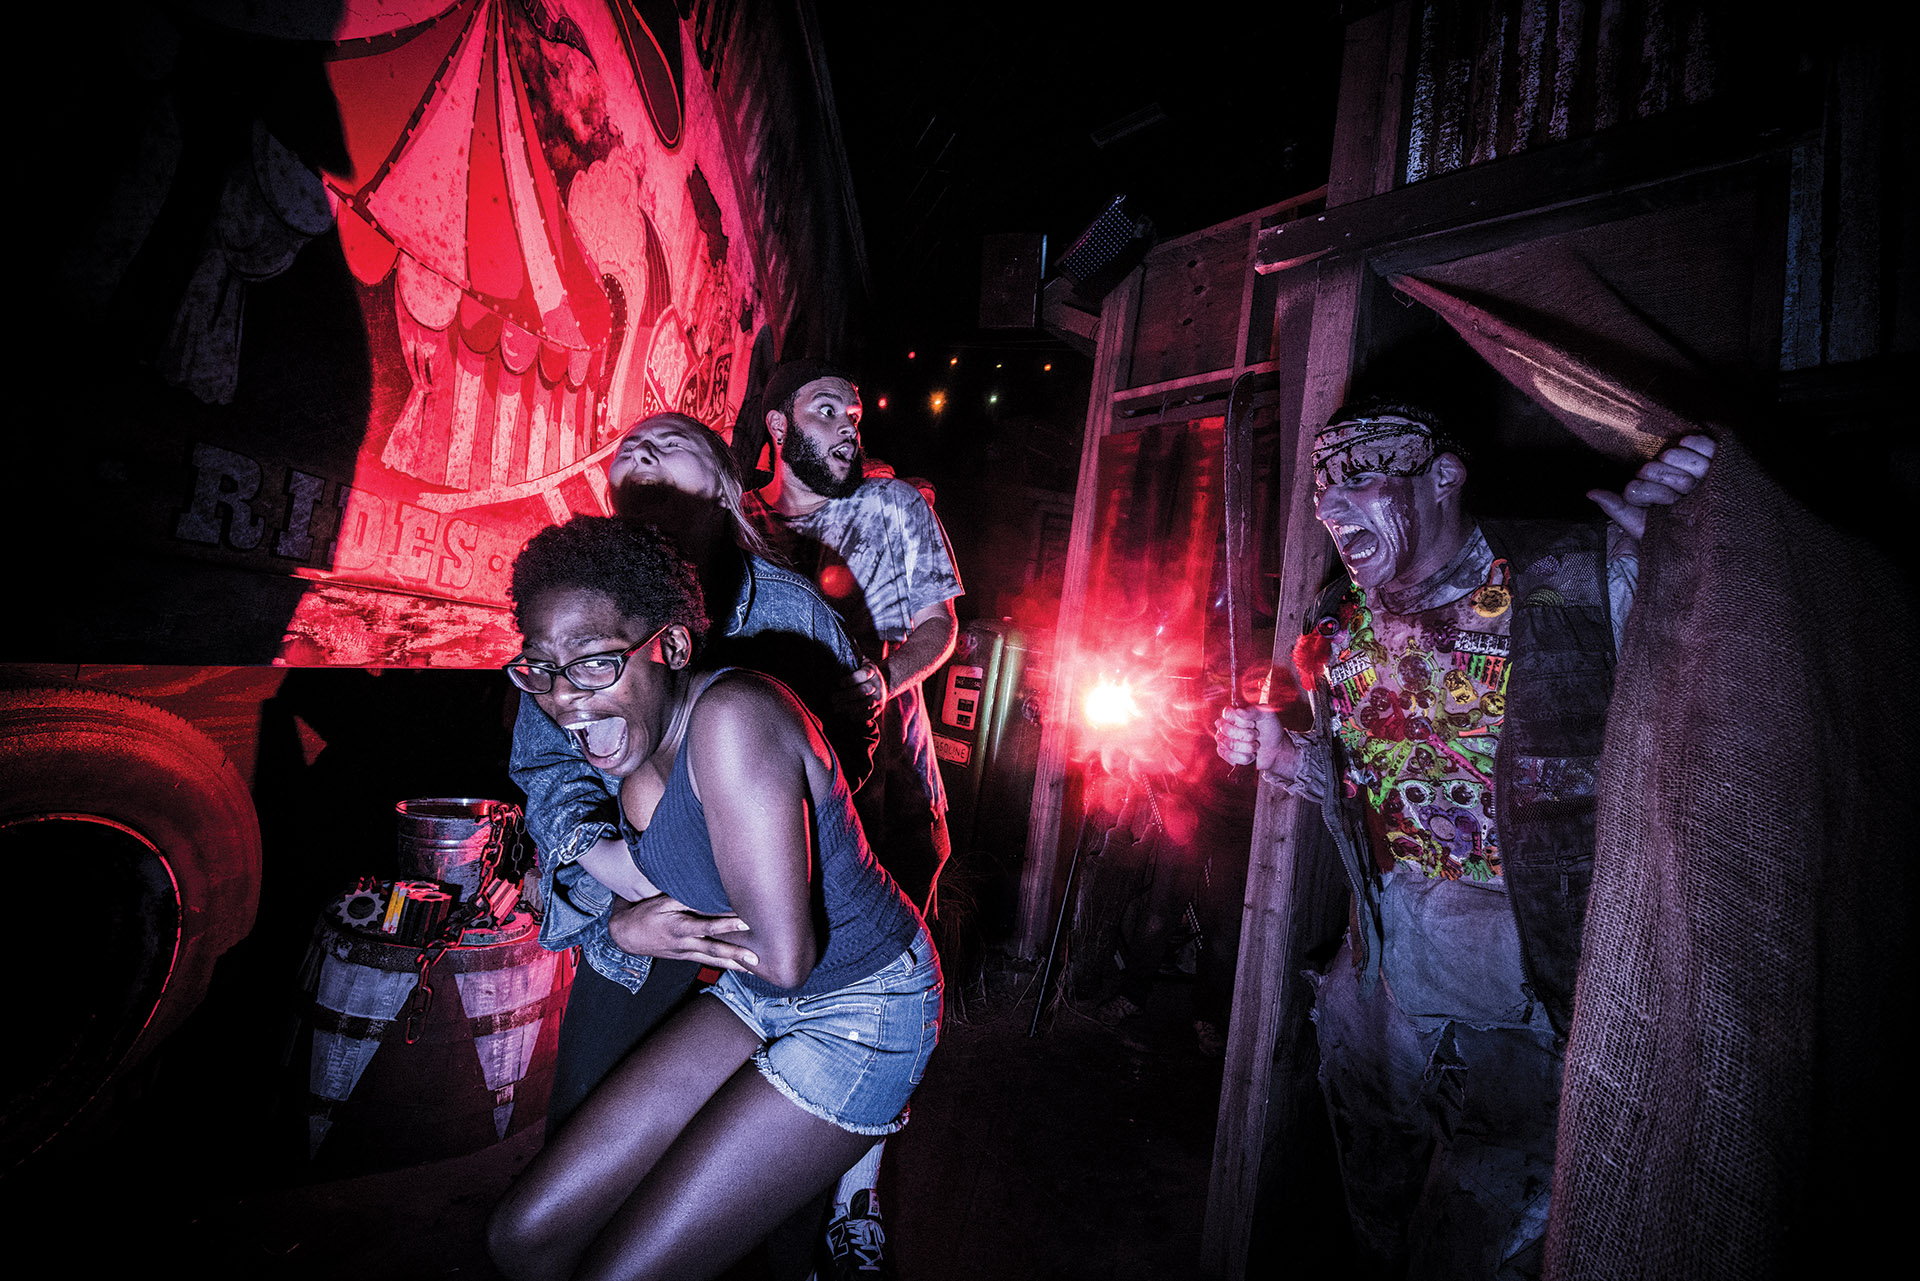 Halloween Horror Nights 2020 to Celebrate 30 Years of Fear at Universal